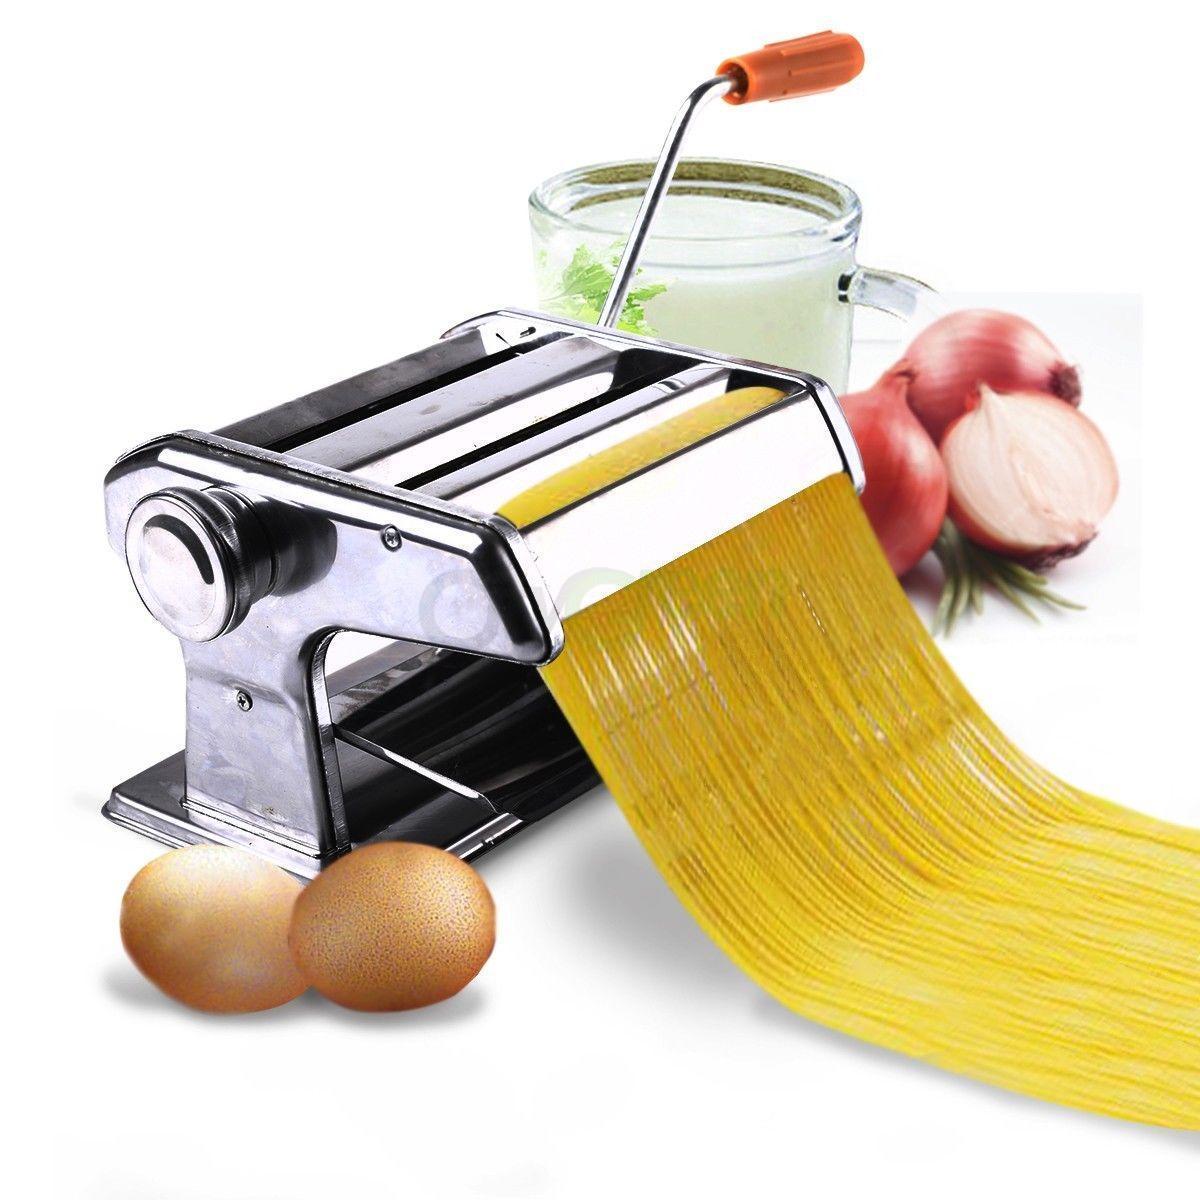 Ktaxon Pasta Machine, Roller Pasta Maker, Adjustable Thickness Settings Noodles Maker with Washable Rollers and Cutter,Perfect for Spaghetti, Fettuccini, Lasagna or Dumpling Skins - image 1 of 8